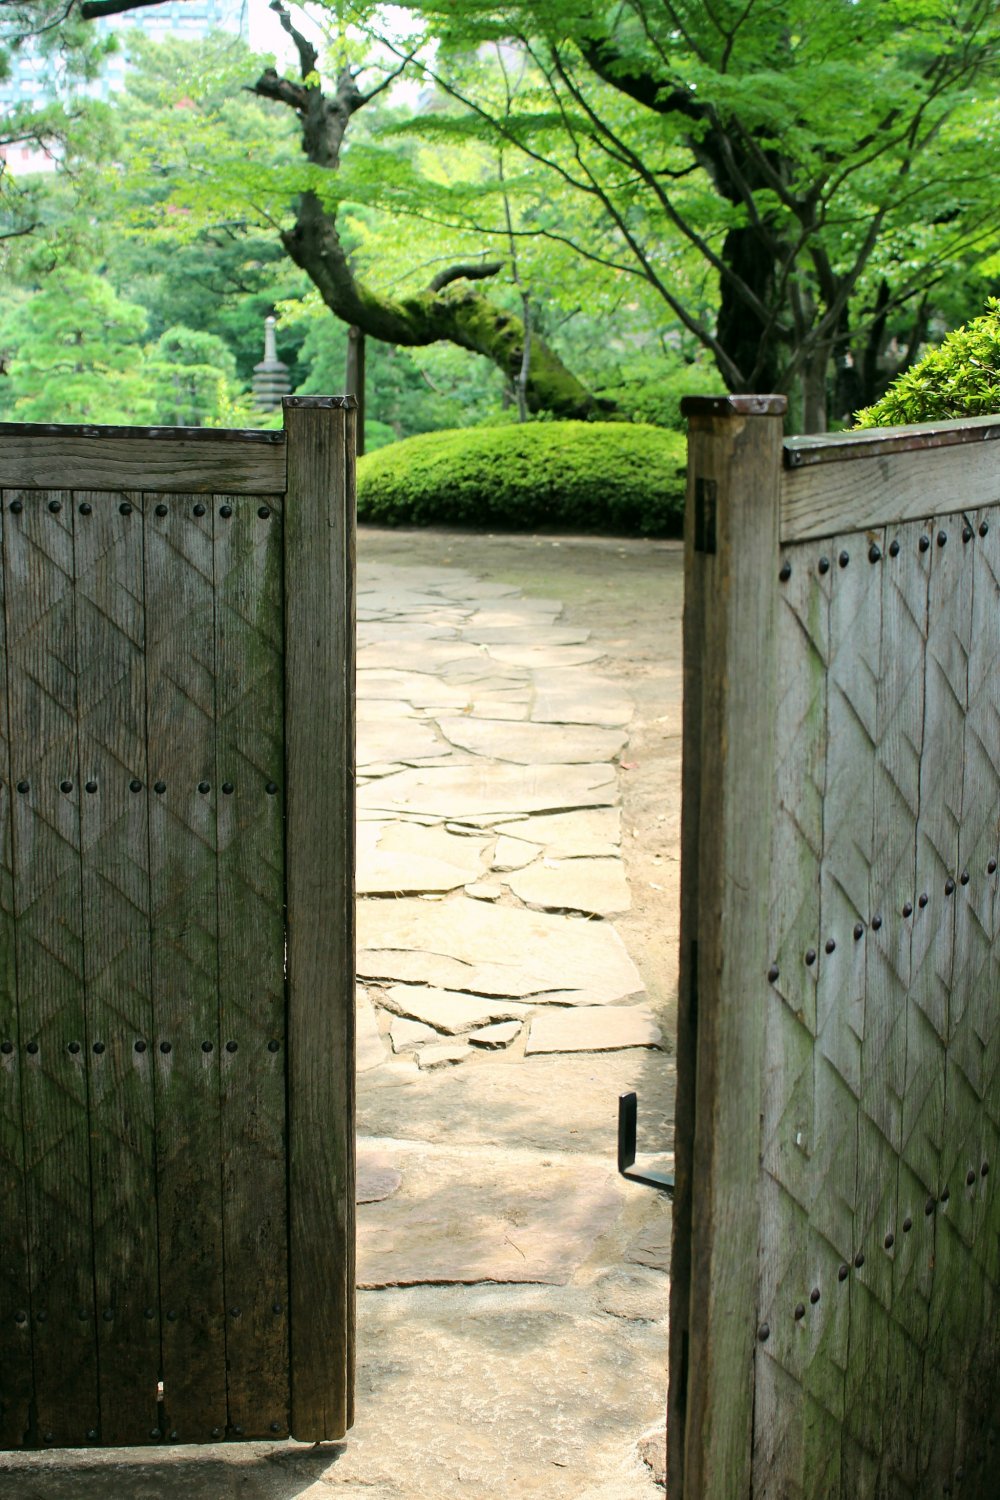 Charming little gate at the entrance